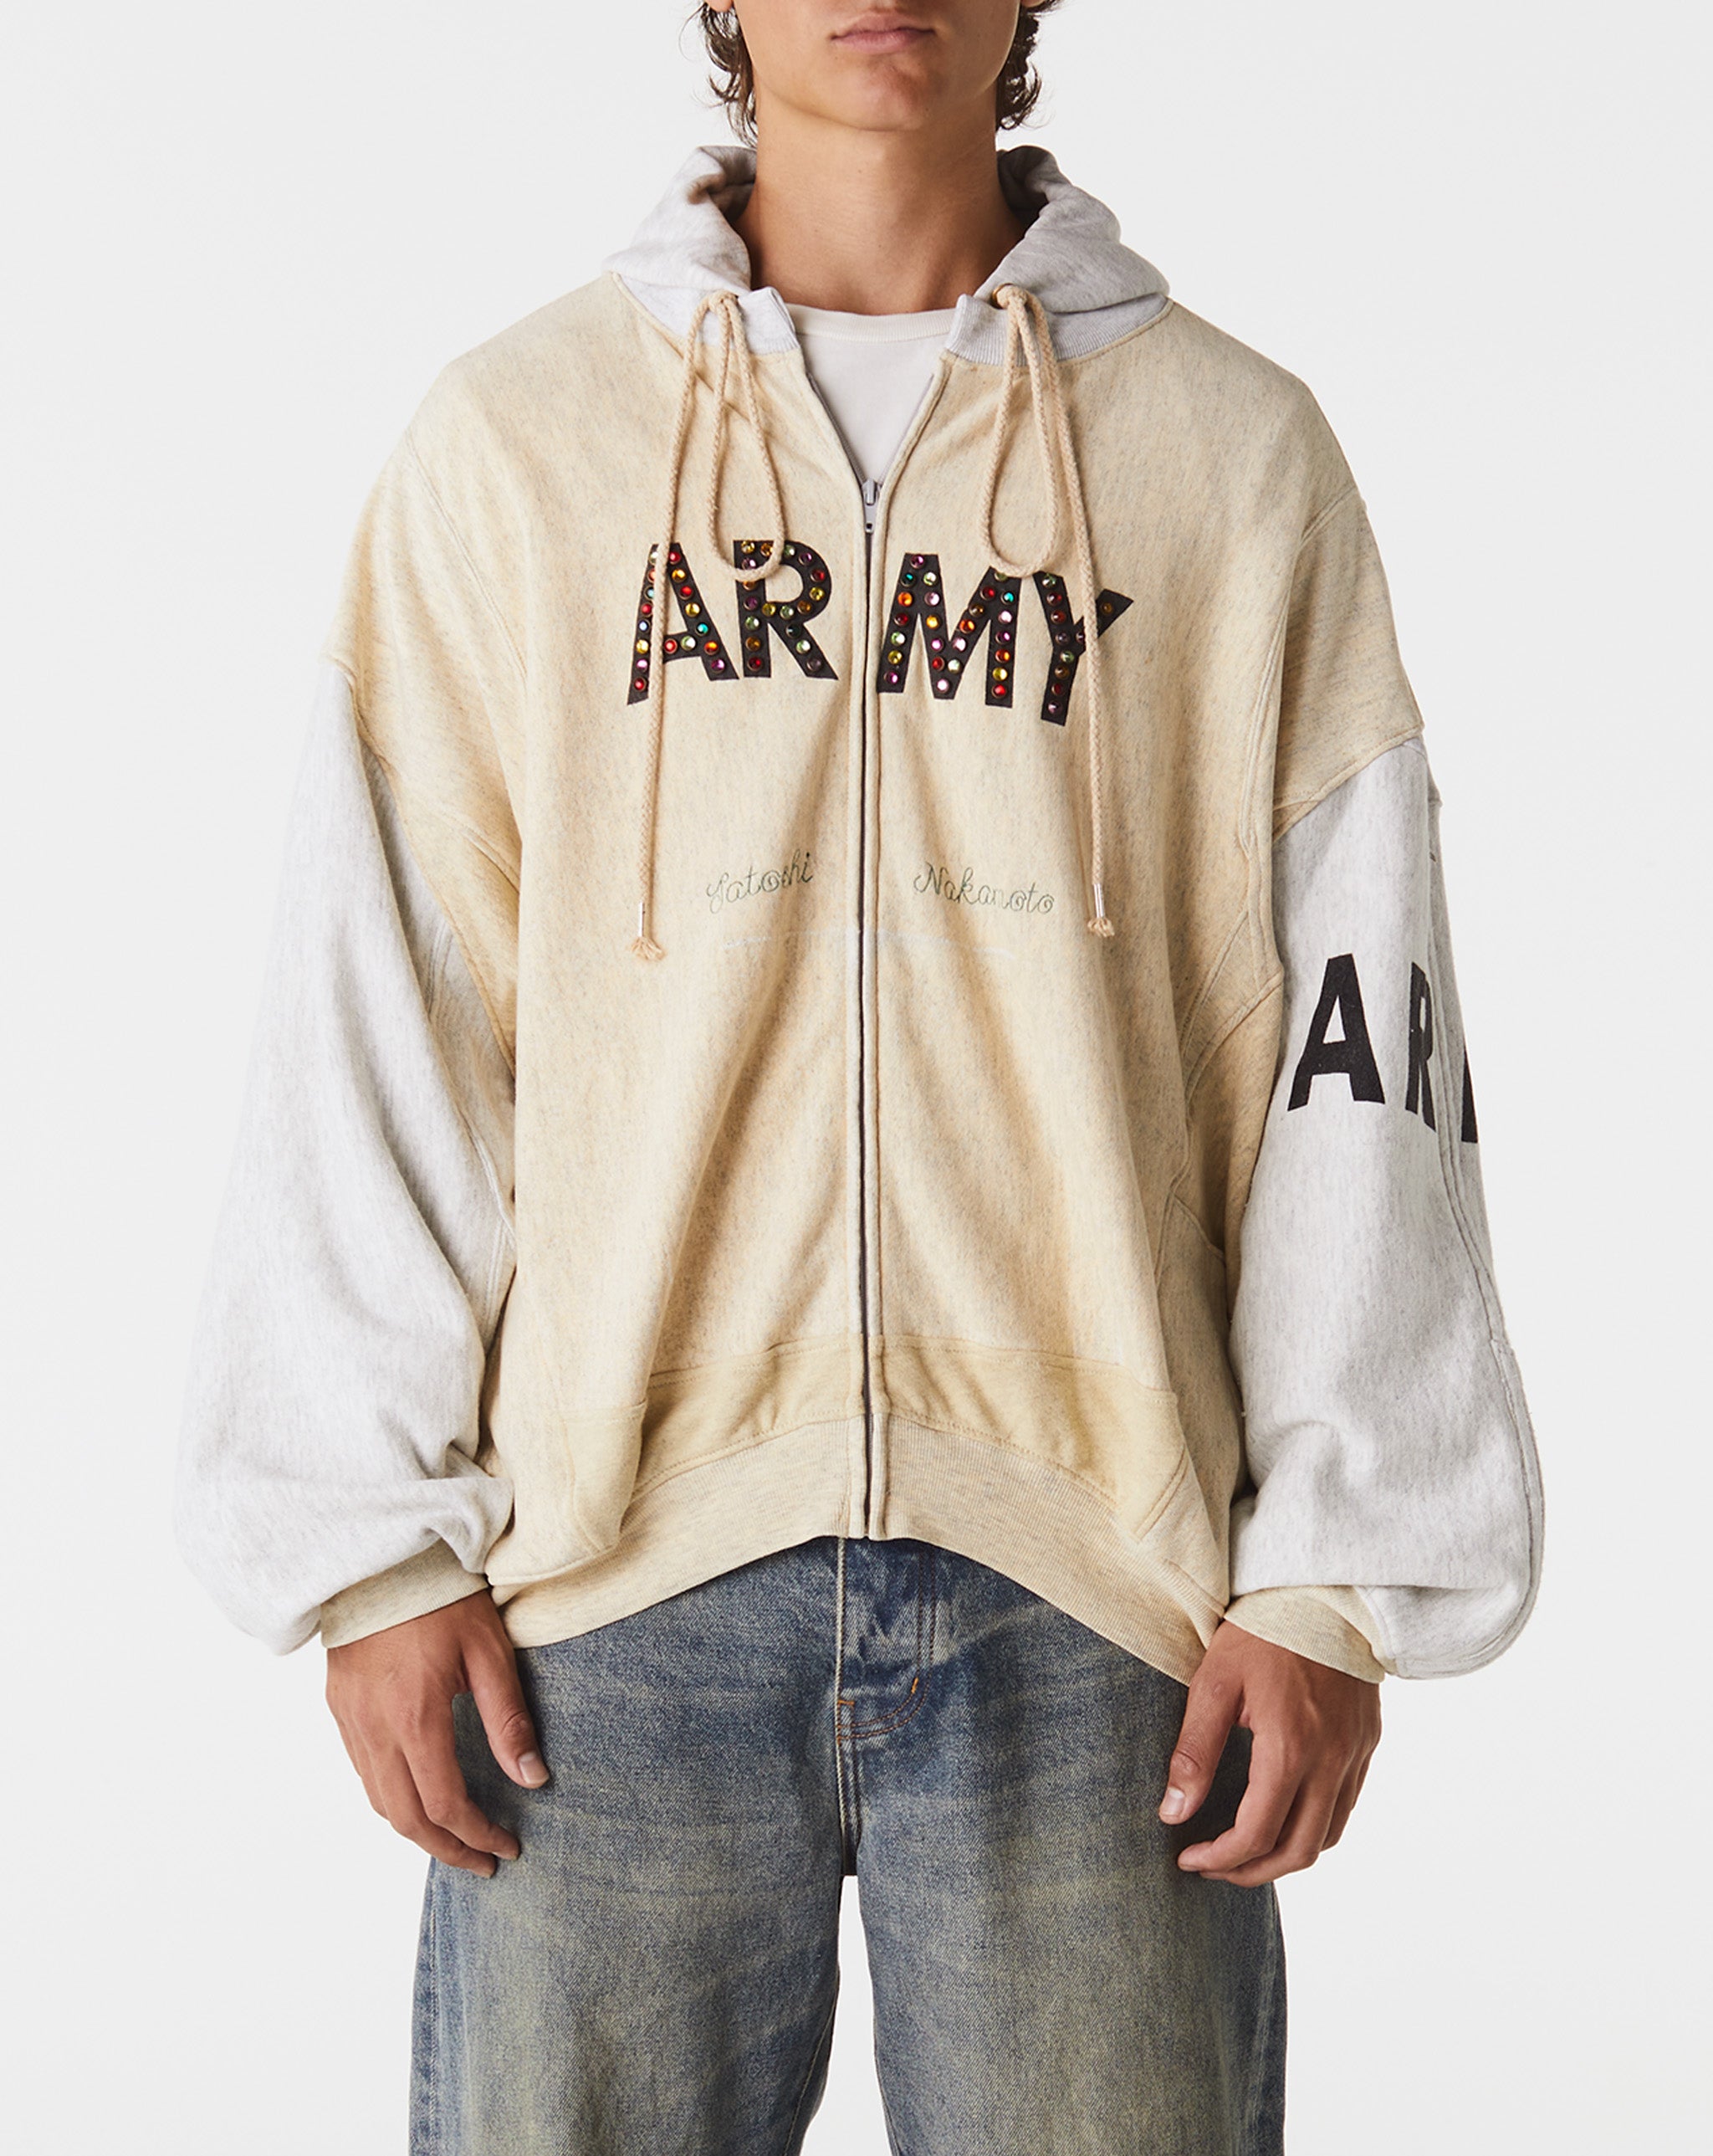 Satoshi Nakamoto Alive Or Just Breathing Hoodie  - Cheap Cerbe Jordan outlet